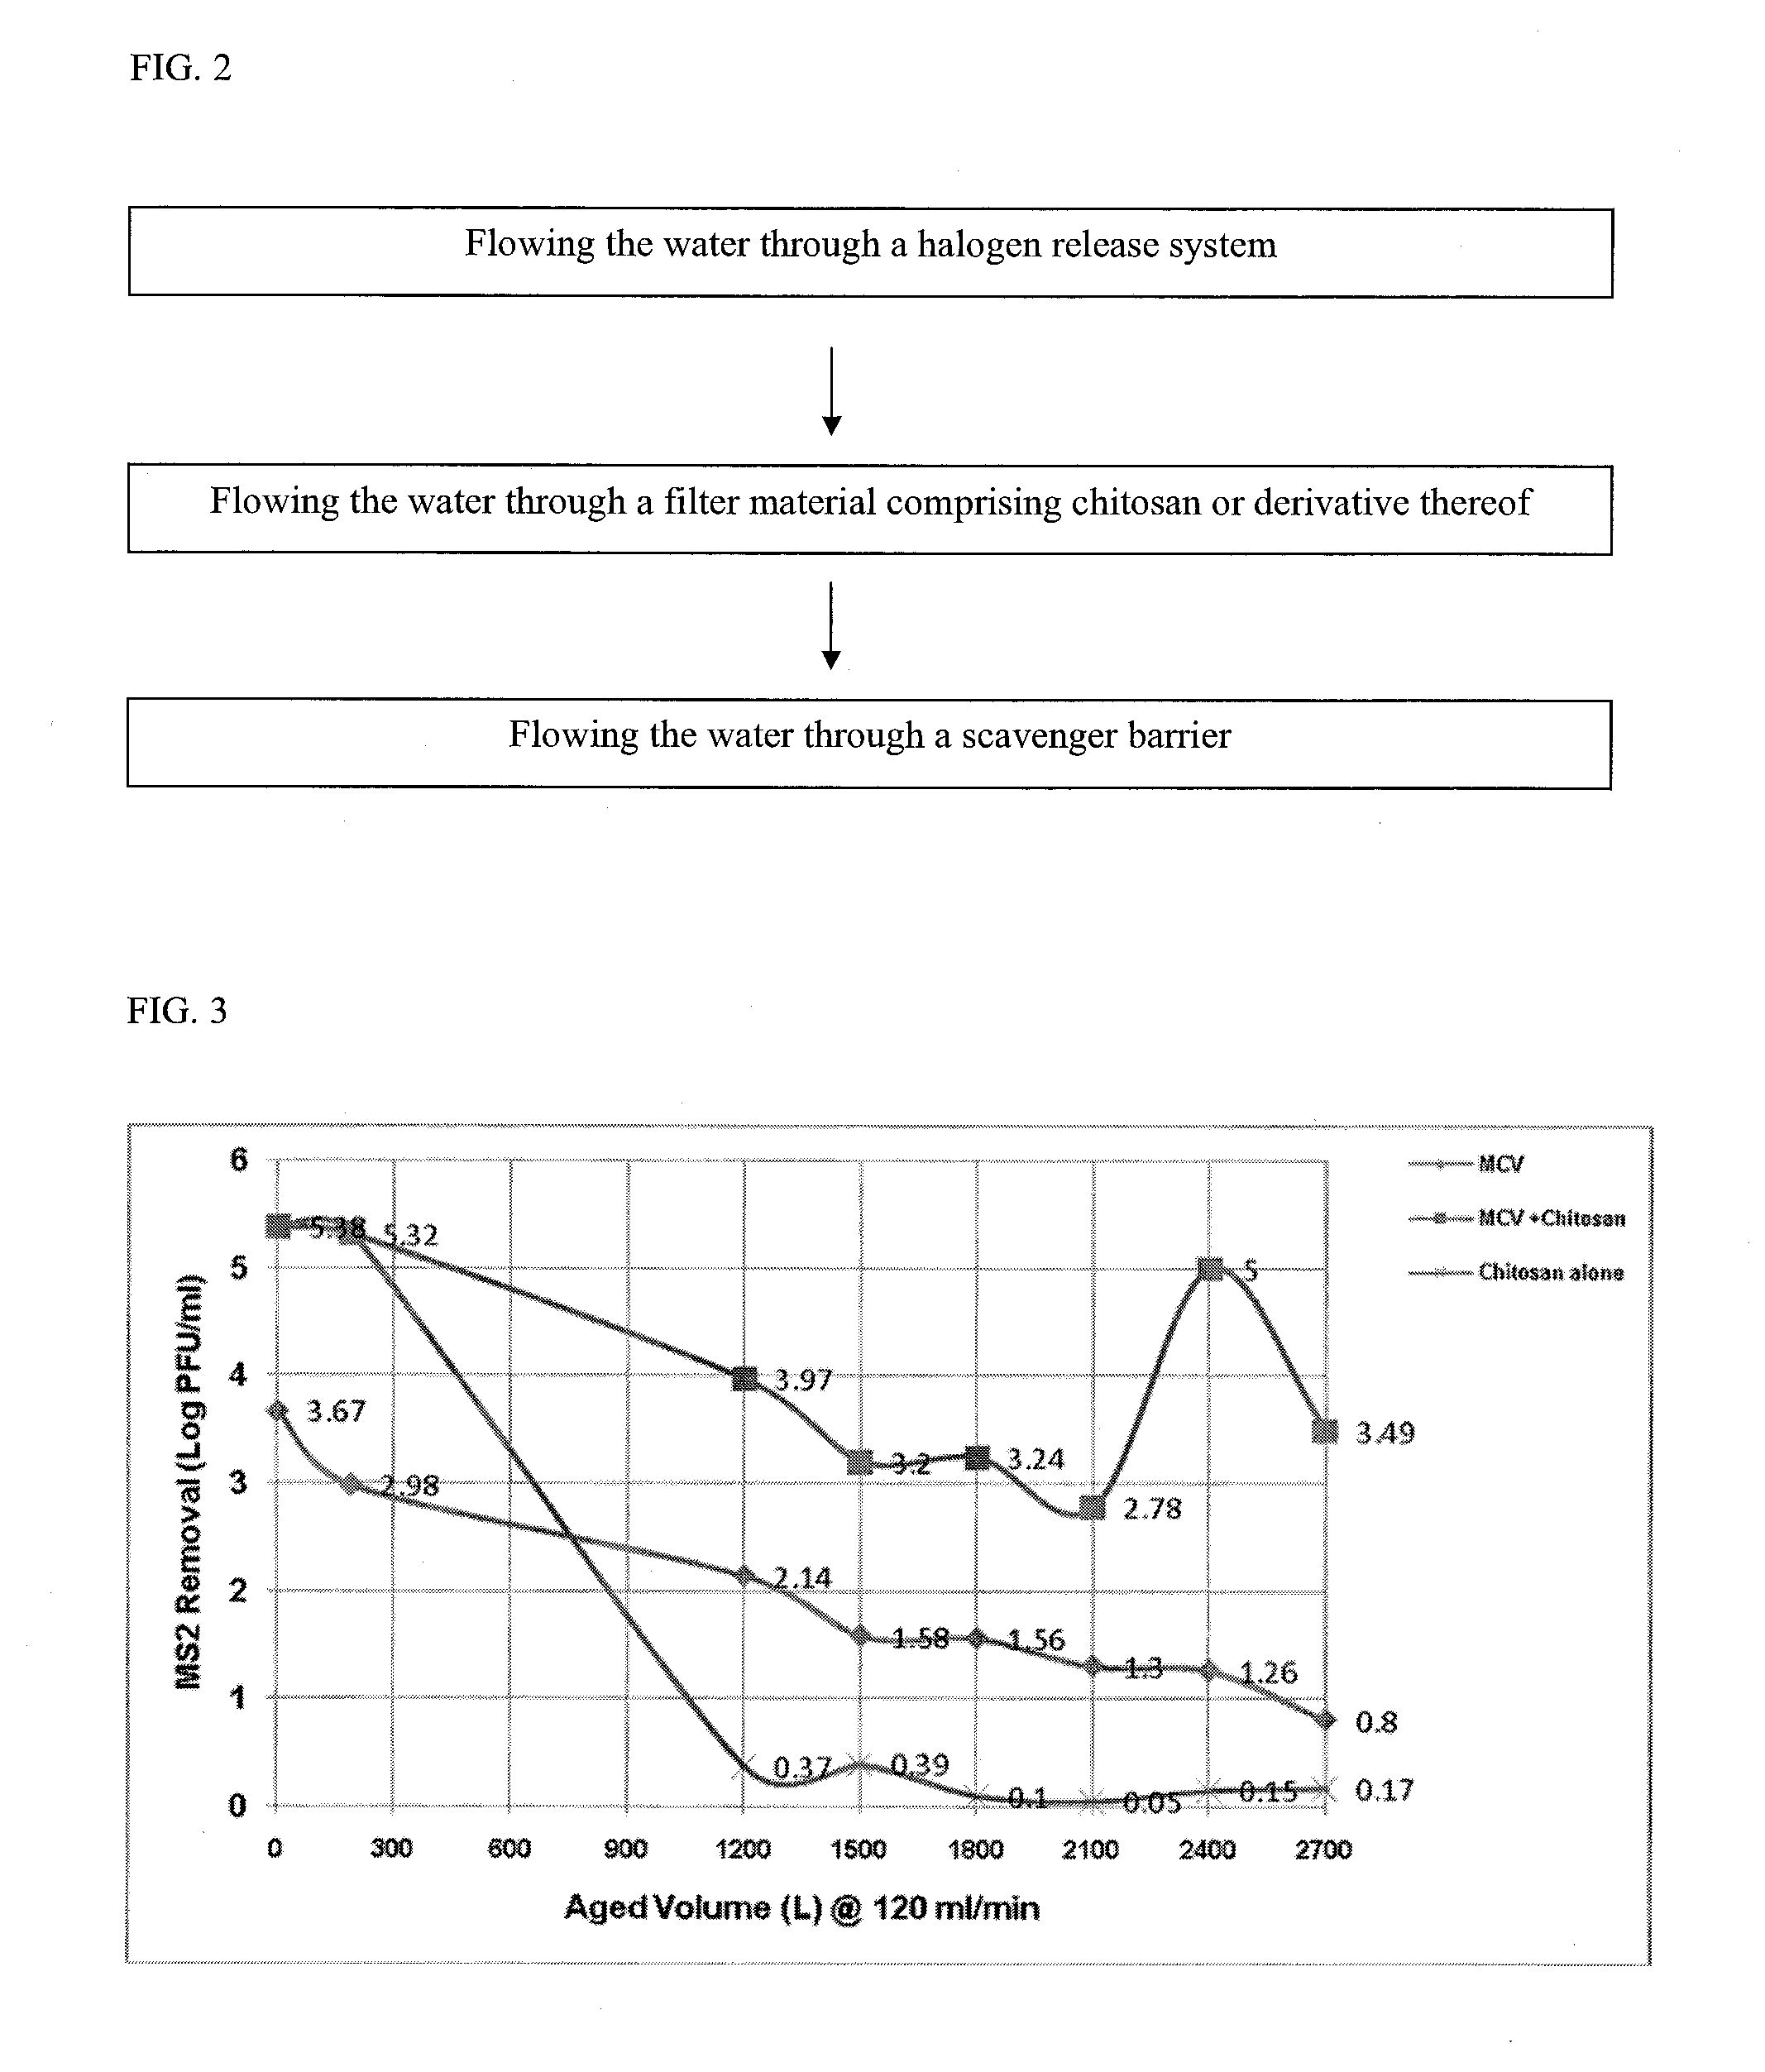 Filter comprising a halogen release system and chitosan